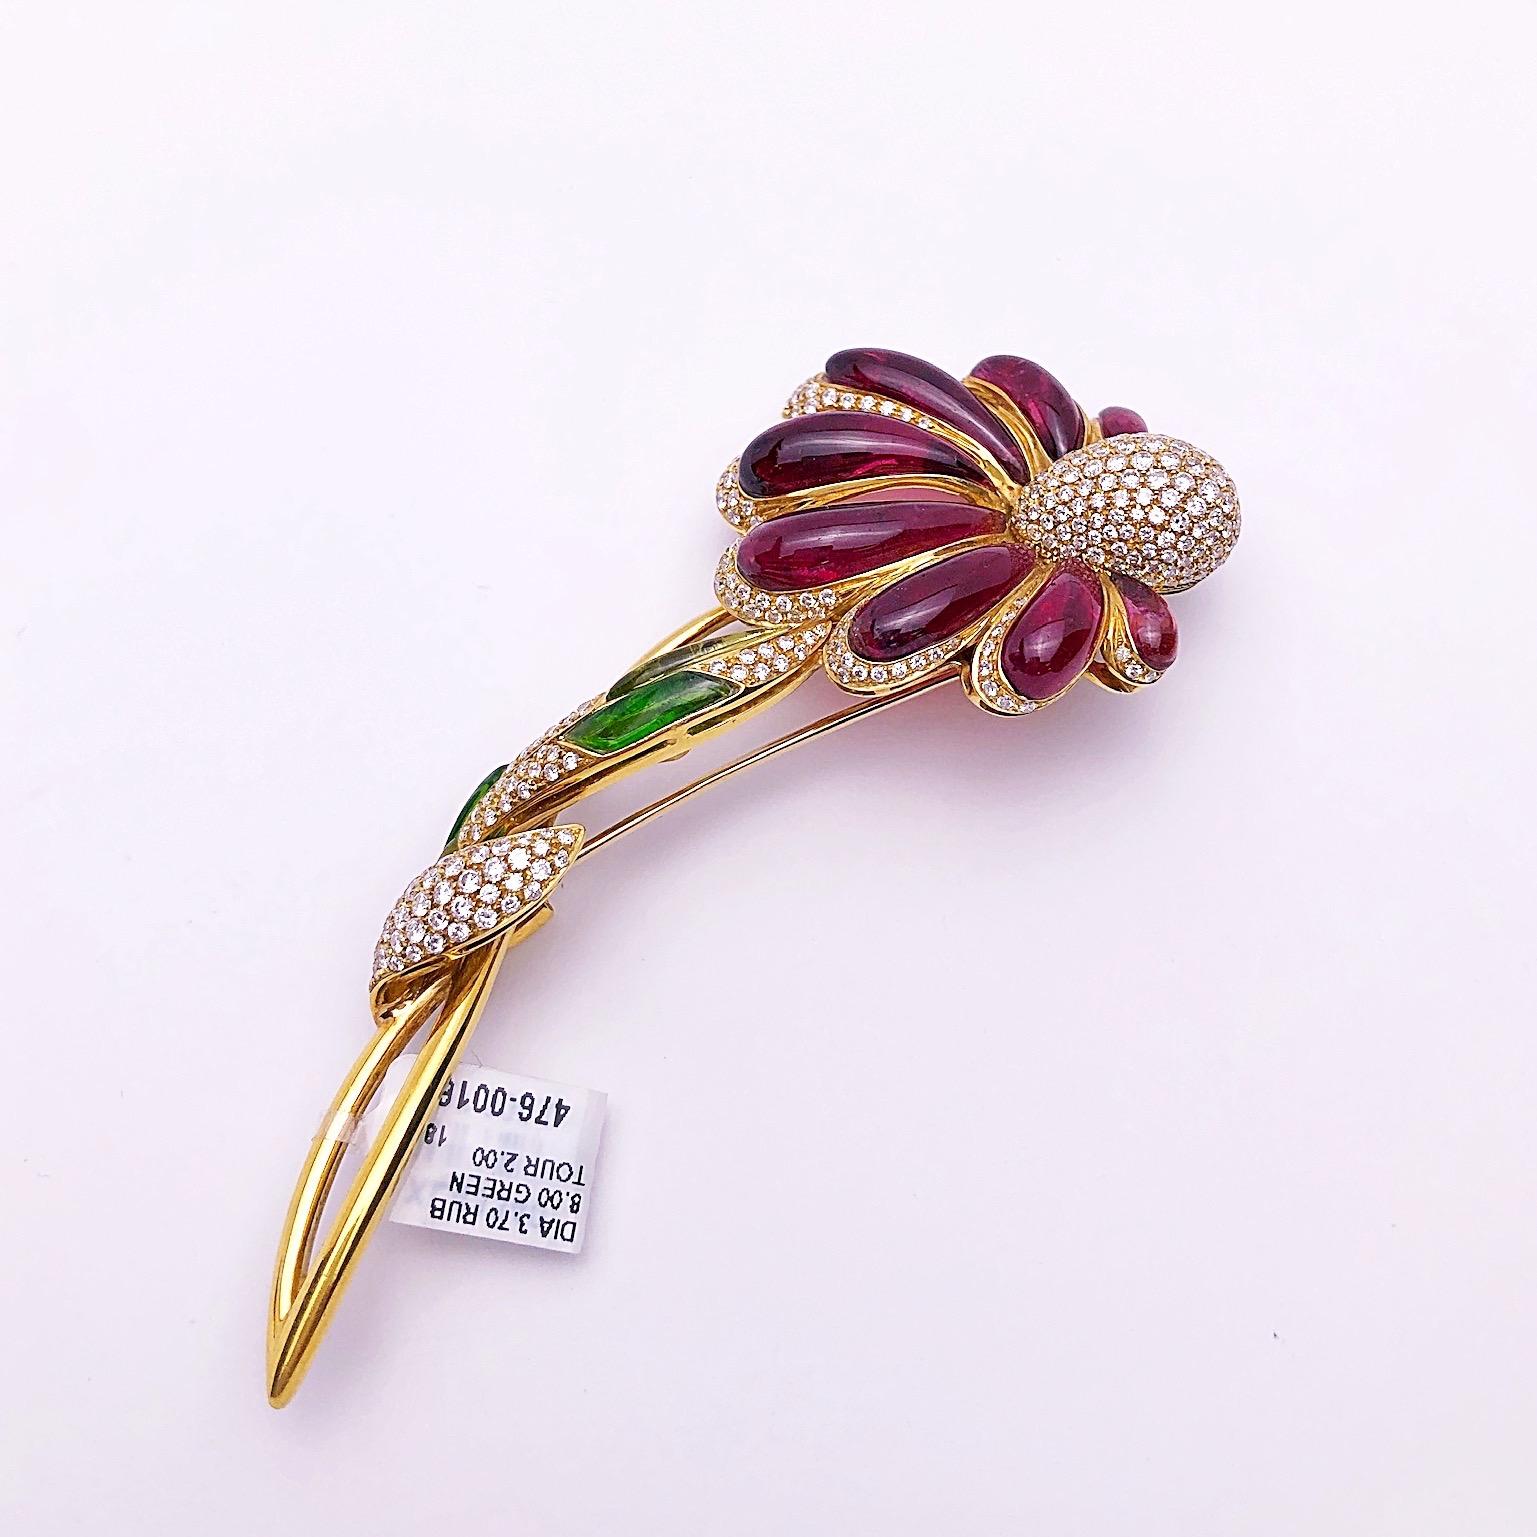 This intricate 18 karat yellow gold flower brooch was made exclusively for Cellini in Italy by Roberto Casarin. The petals are beautifully set with pave diamonds and hand carved and polished rubelite. The flower is further detailed with the bud,